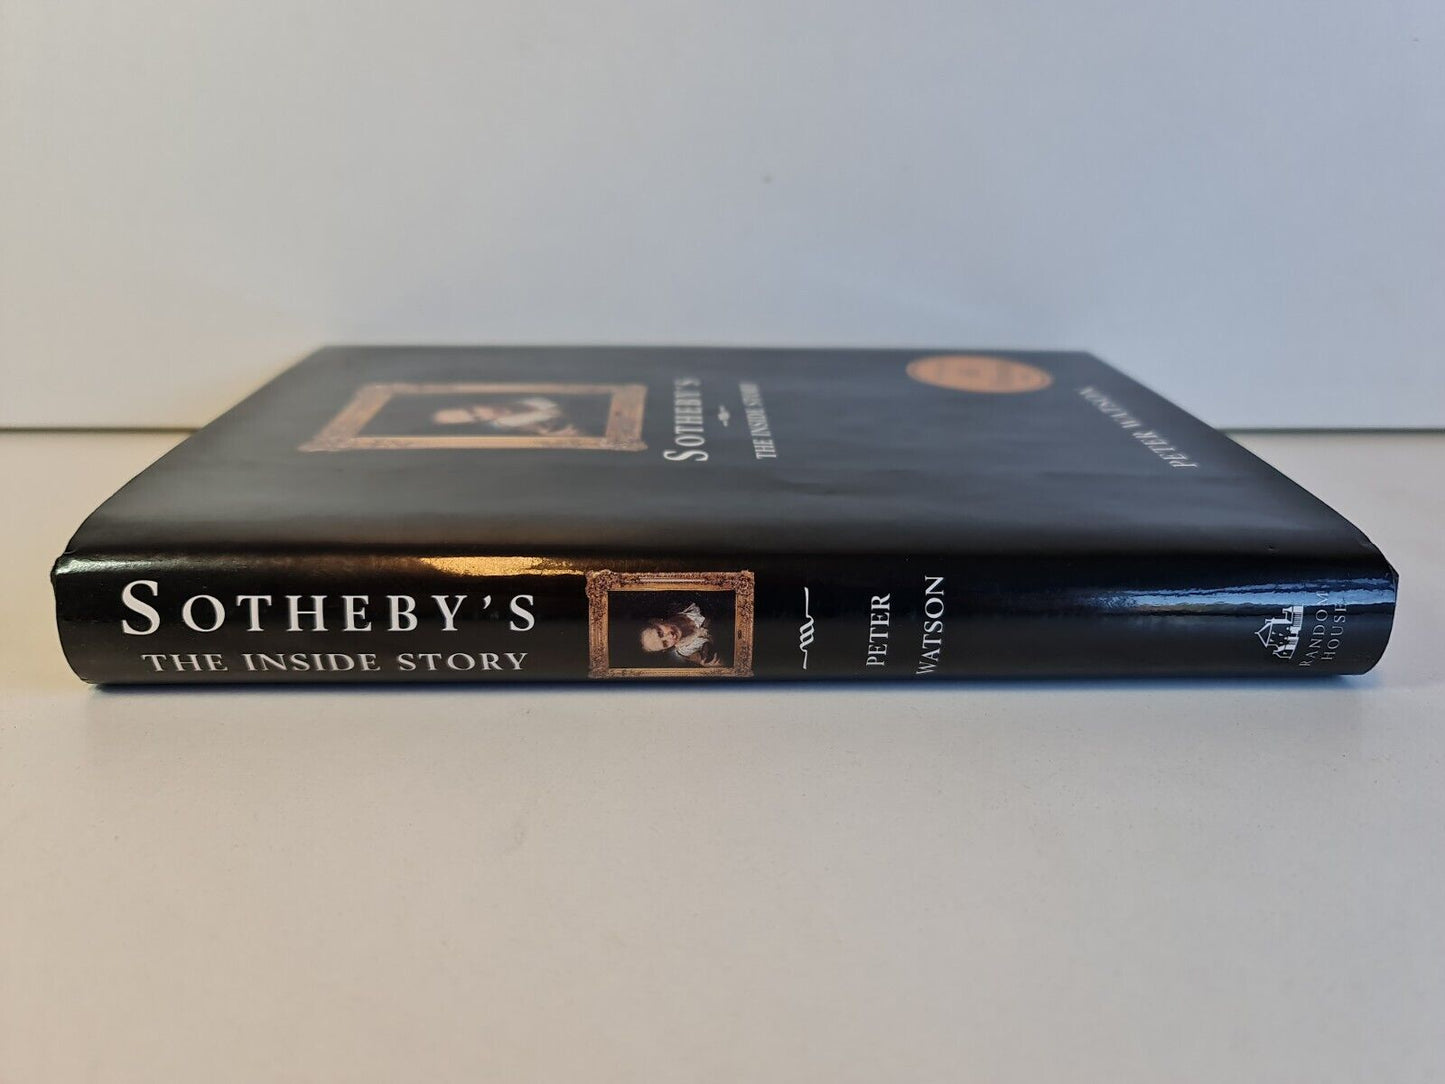 Sotheby's: The Inside Story by Peter Watson (1998)